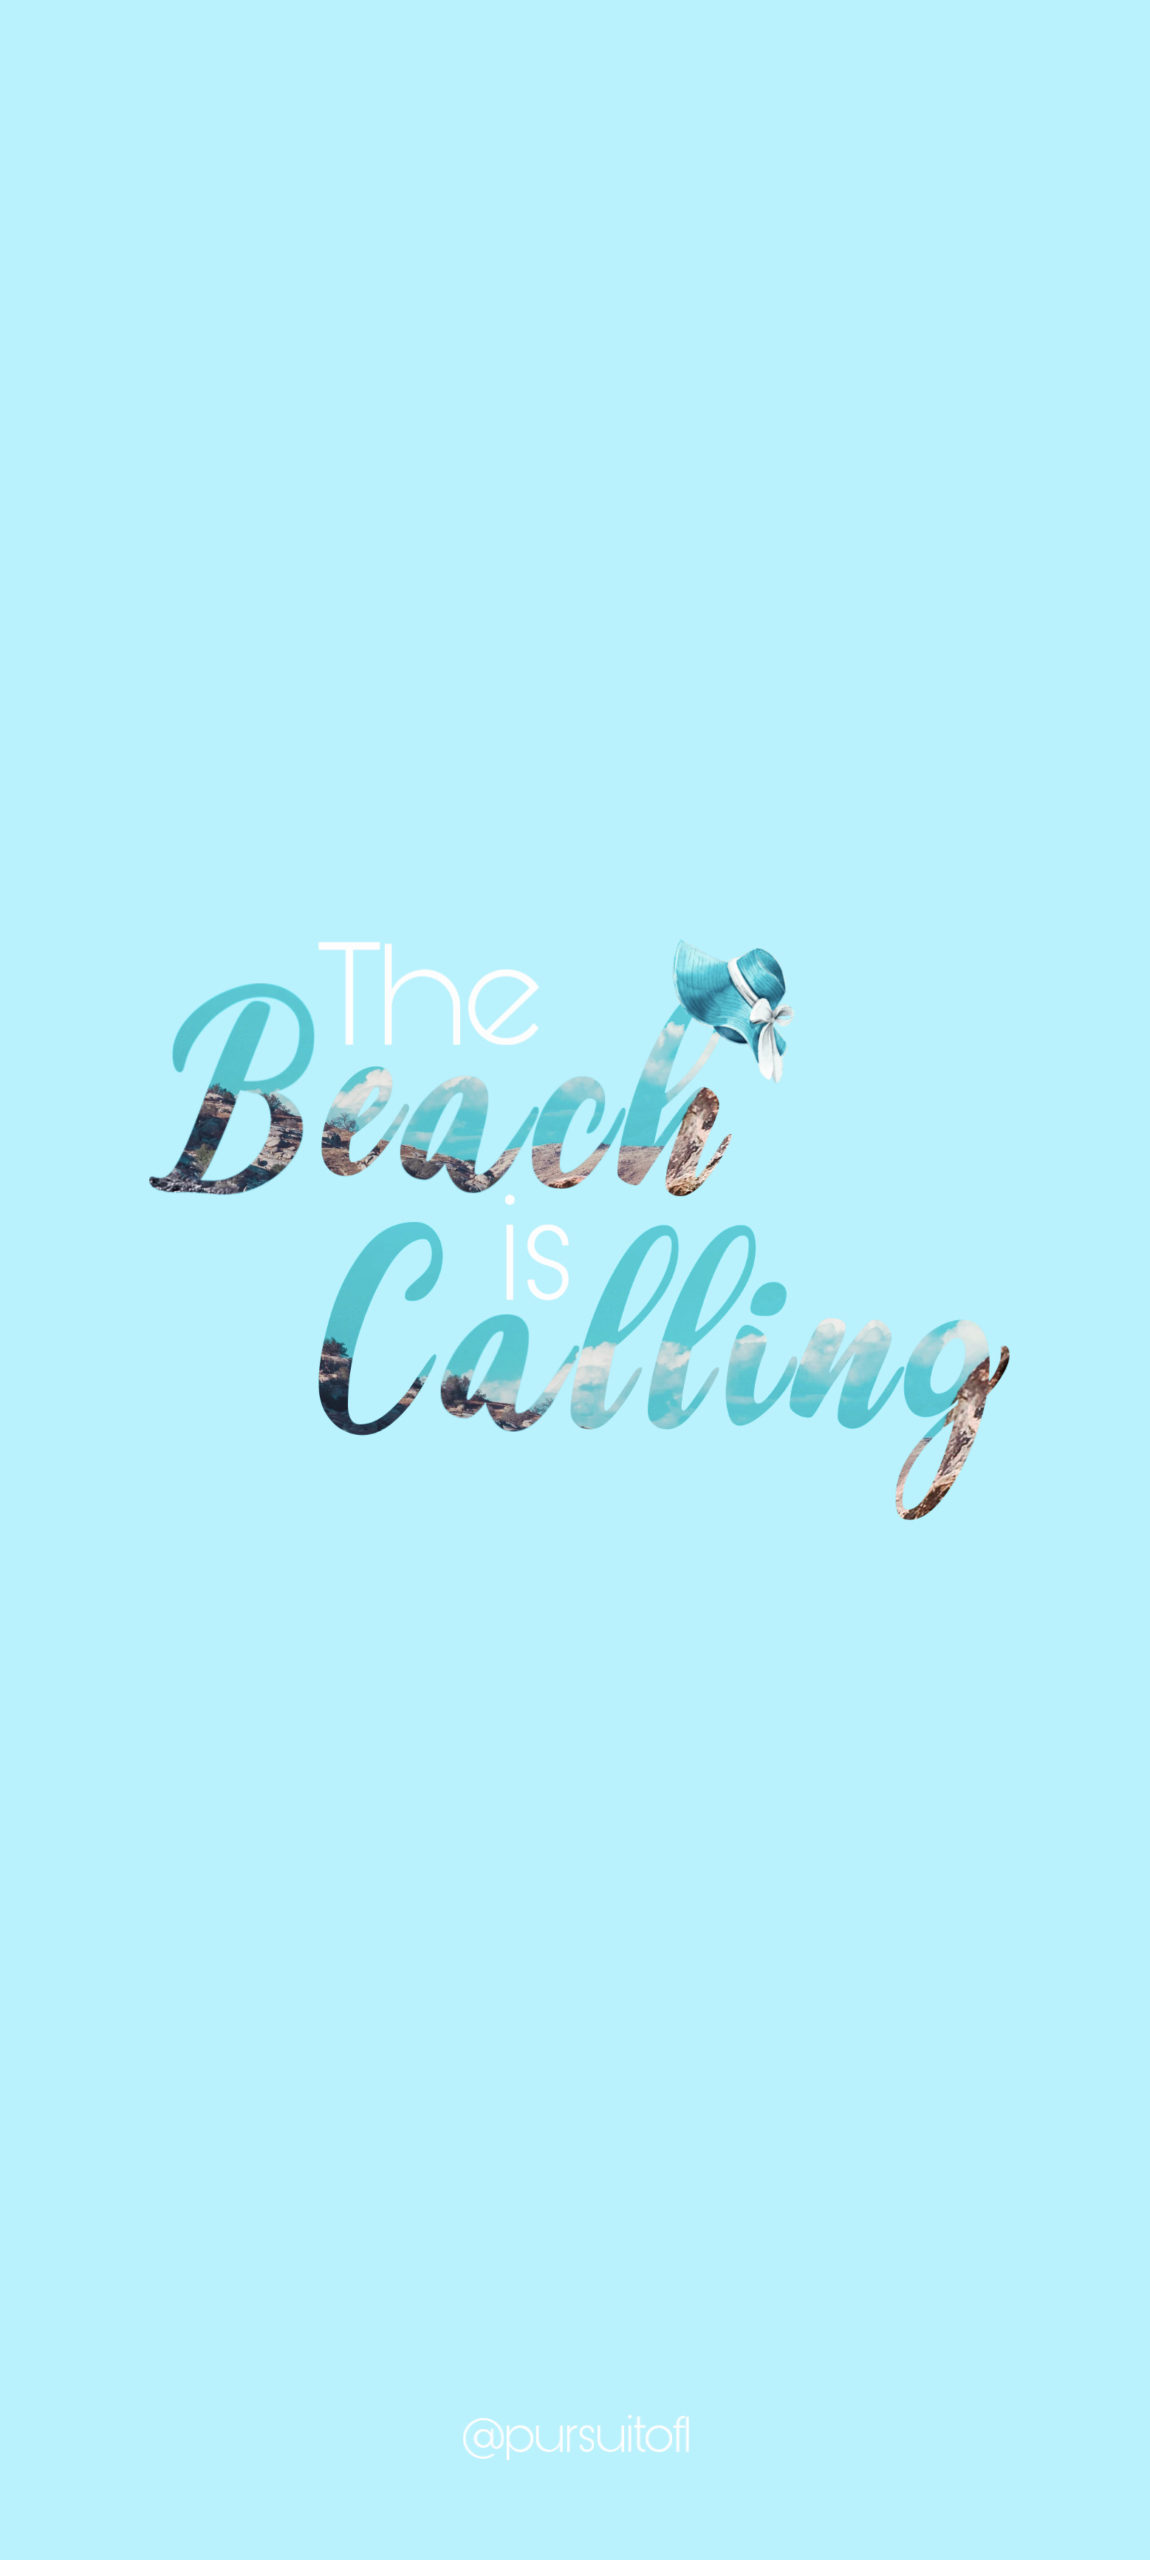 Blue summer phone wallpaper with the beach is calling text and blue sun hat with white ribbon